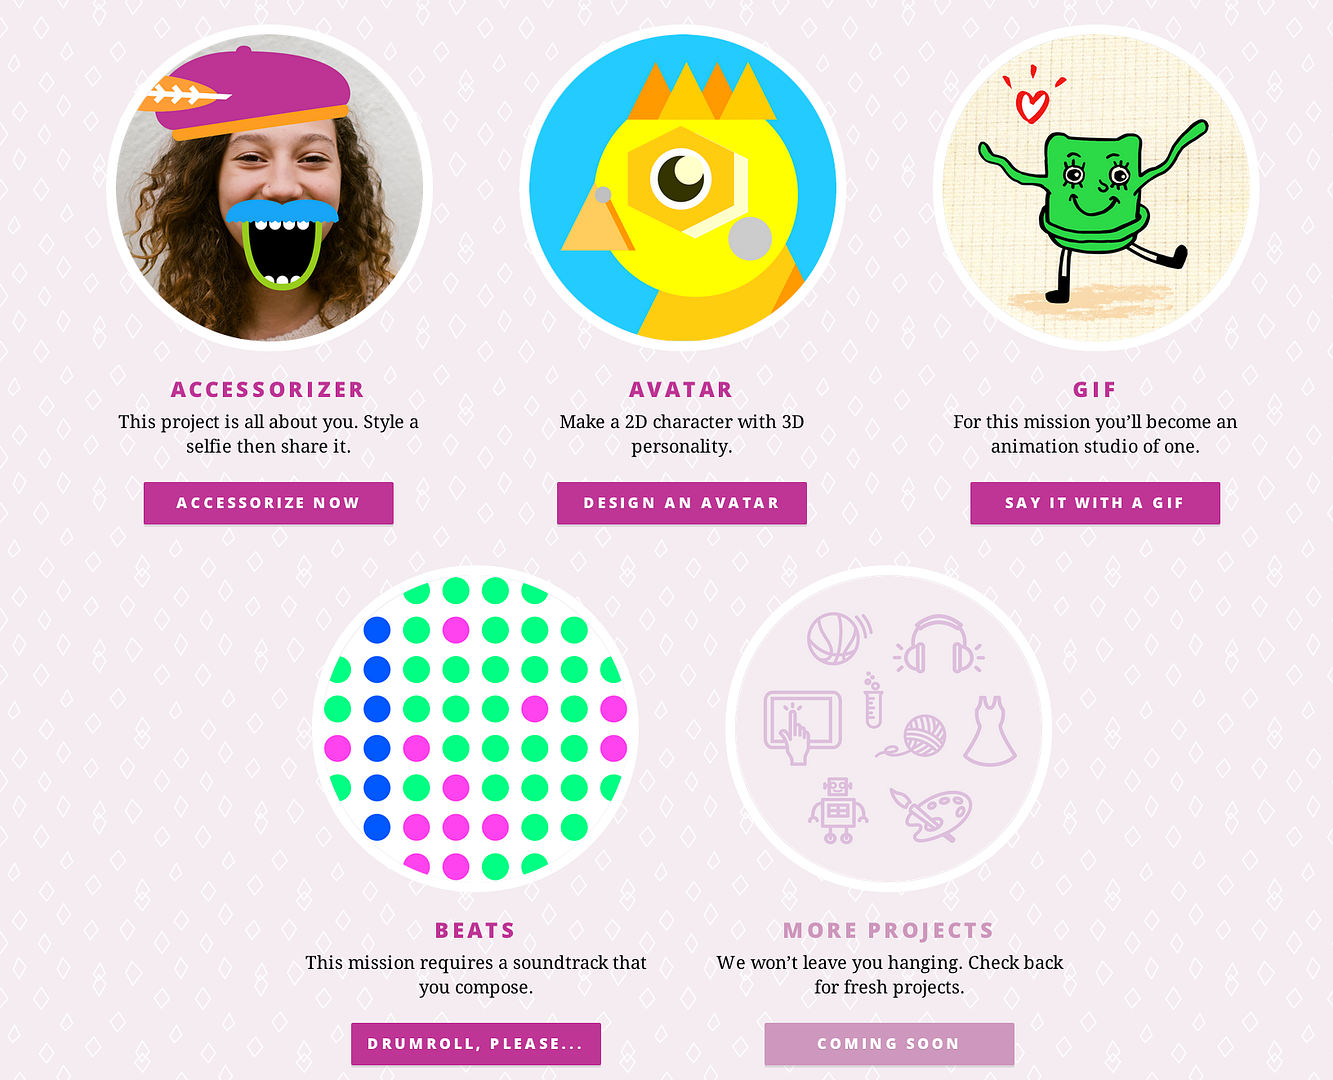 Google MadeWithCode website helps inspire girls to pursue their dreams through coding